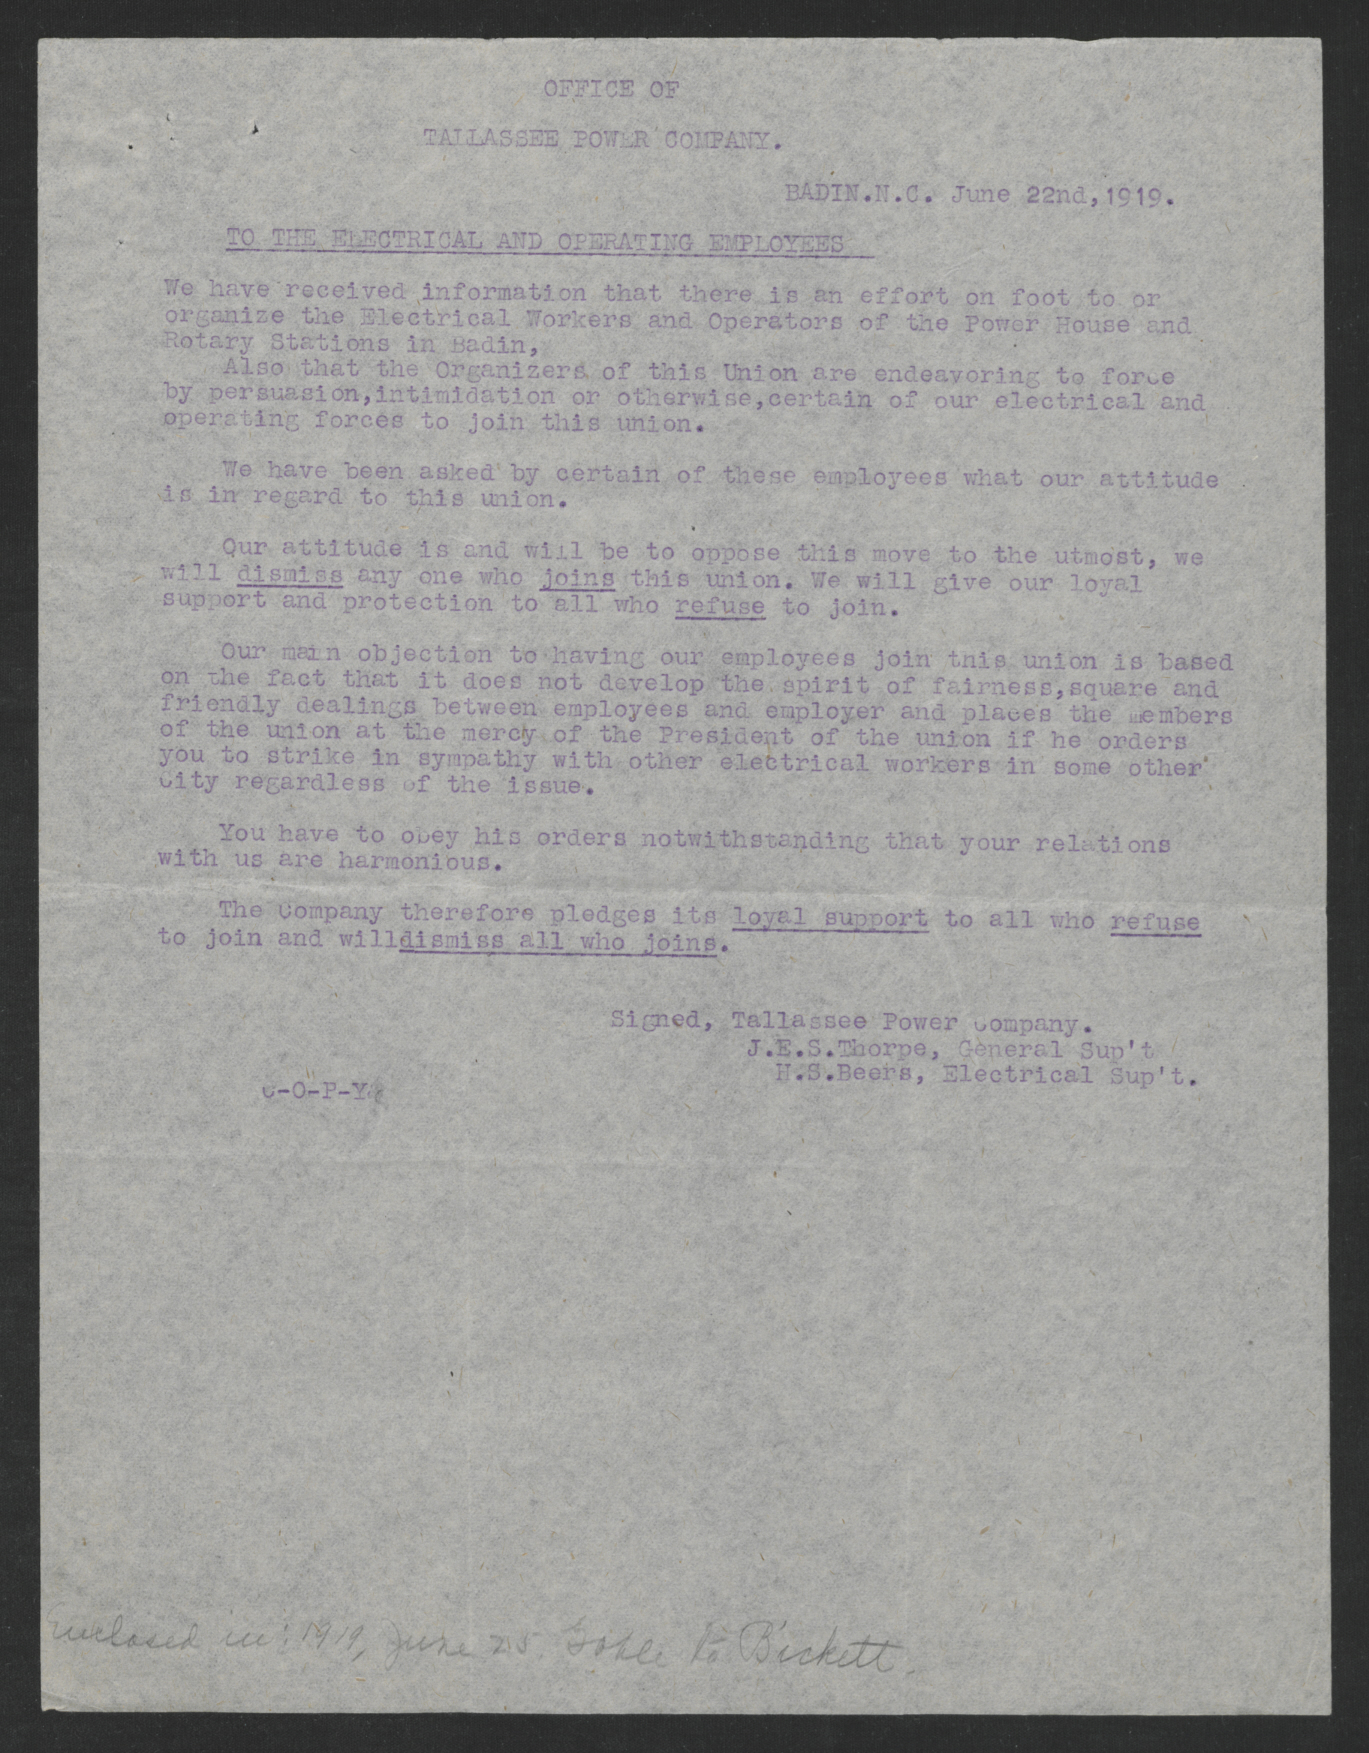 Letter from John E. S. Thorpe and Harold S. Beers to the Eletrical and Operating Employees of the Tallassee Power Company, June 22, 1919